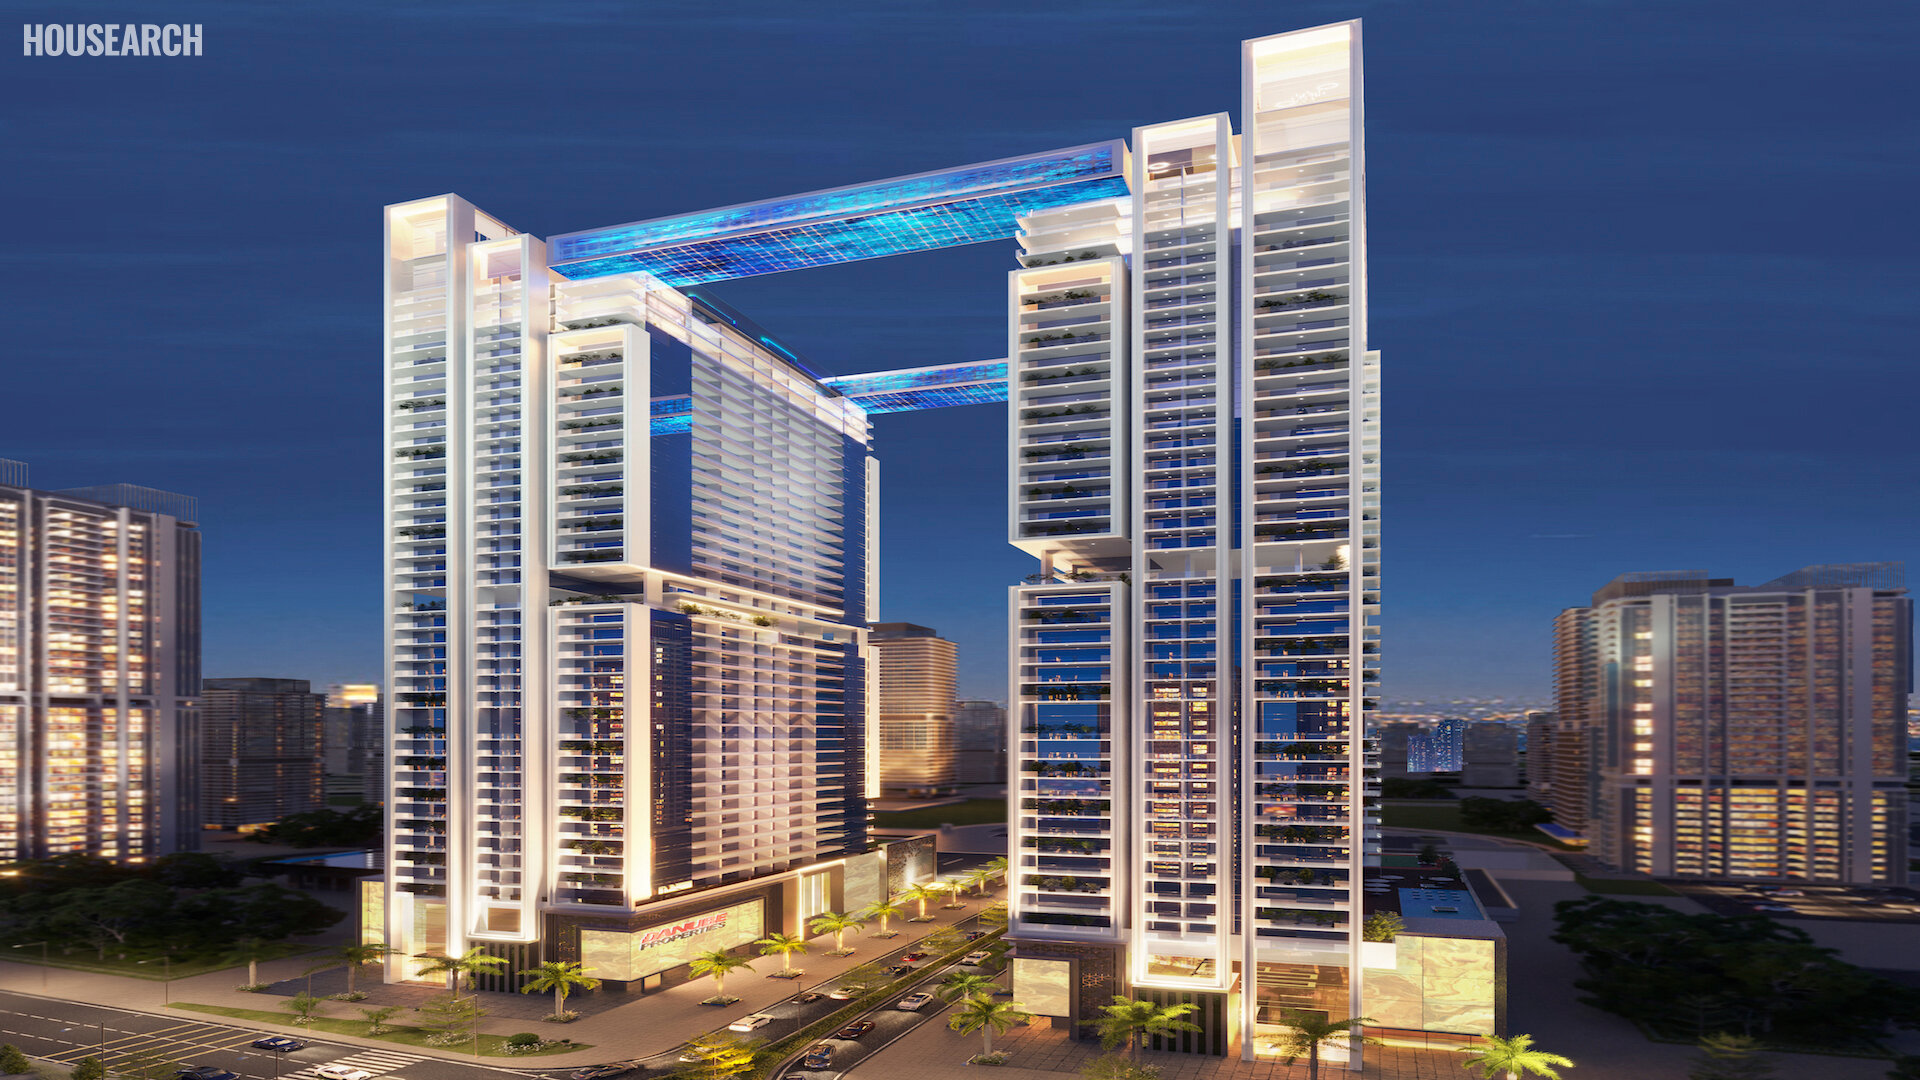 Viewz in Dubai - apartments and flats for sale, floor plans, properties ...